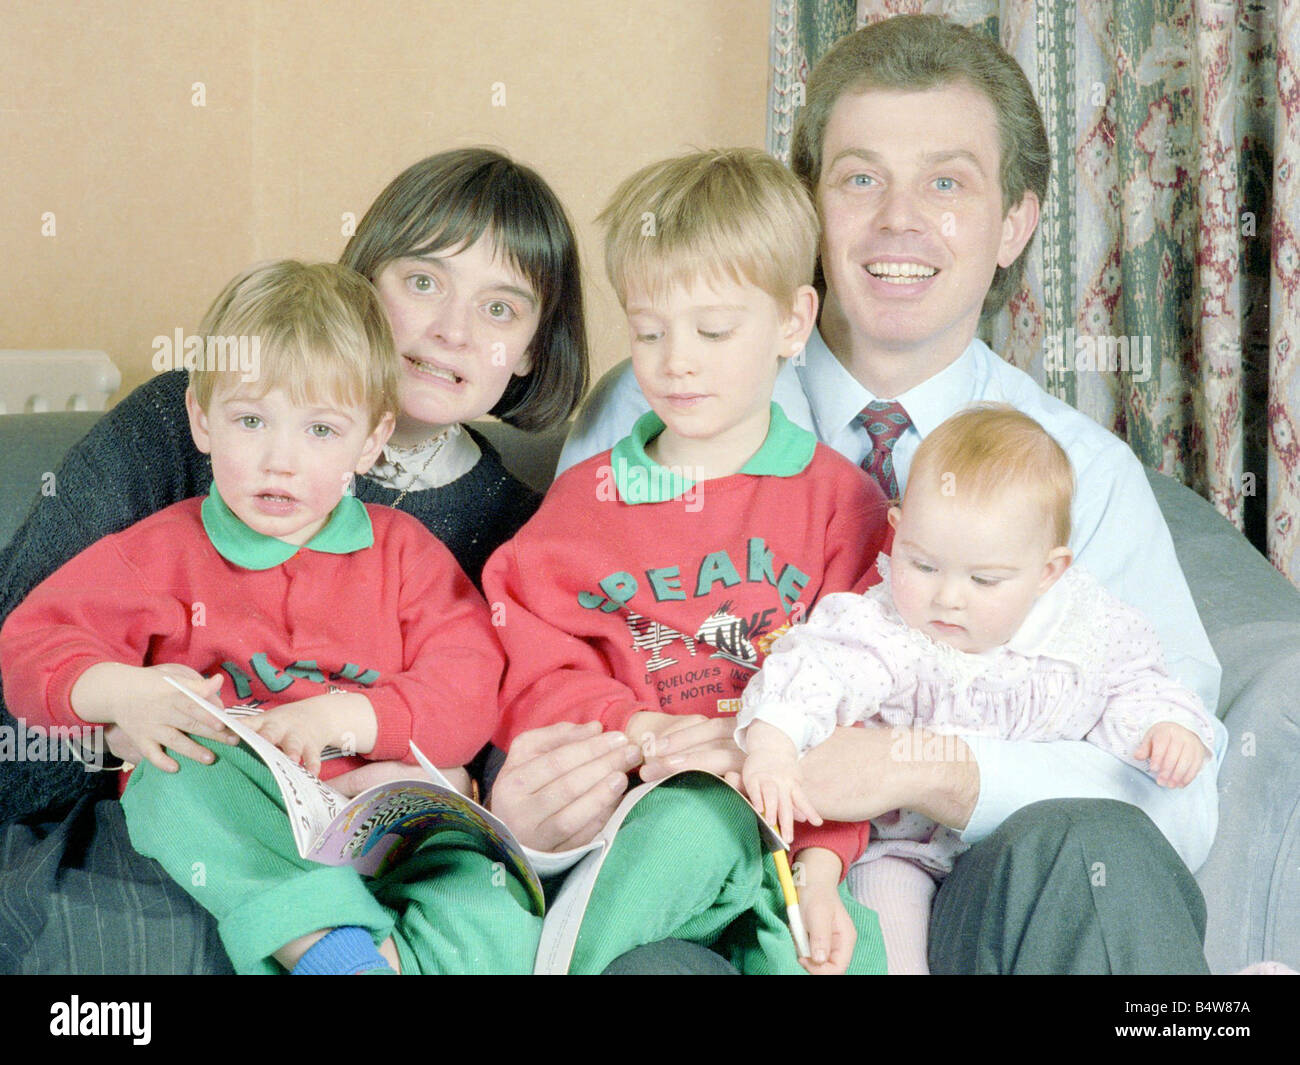 Tony Blair and family December 1988 Tony Blair future labour prime minister with his wife Cherie and sons Ewan 4 and Nicky 3 and their daughter Kathryn 8 months Mirrorpix com Stock Photo